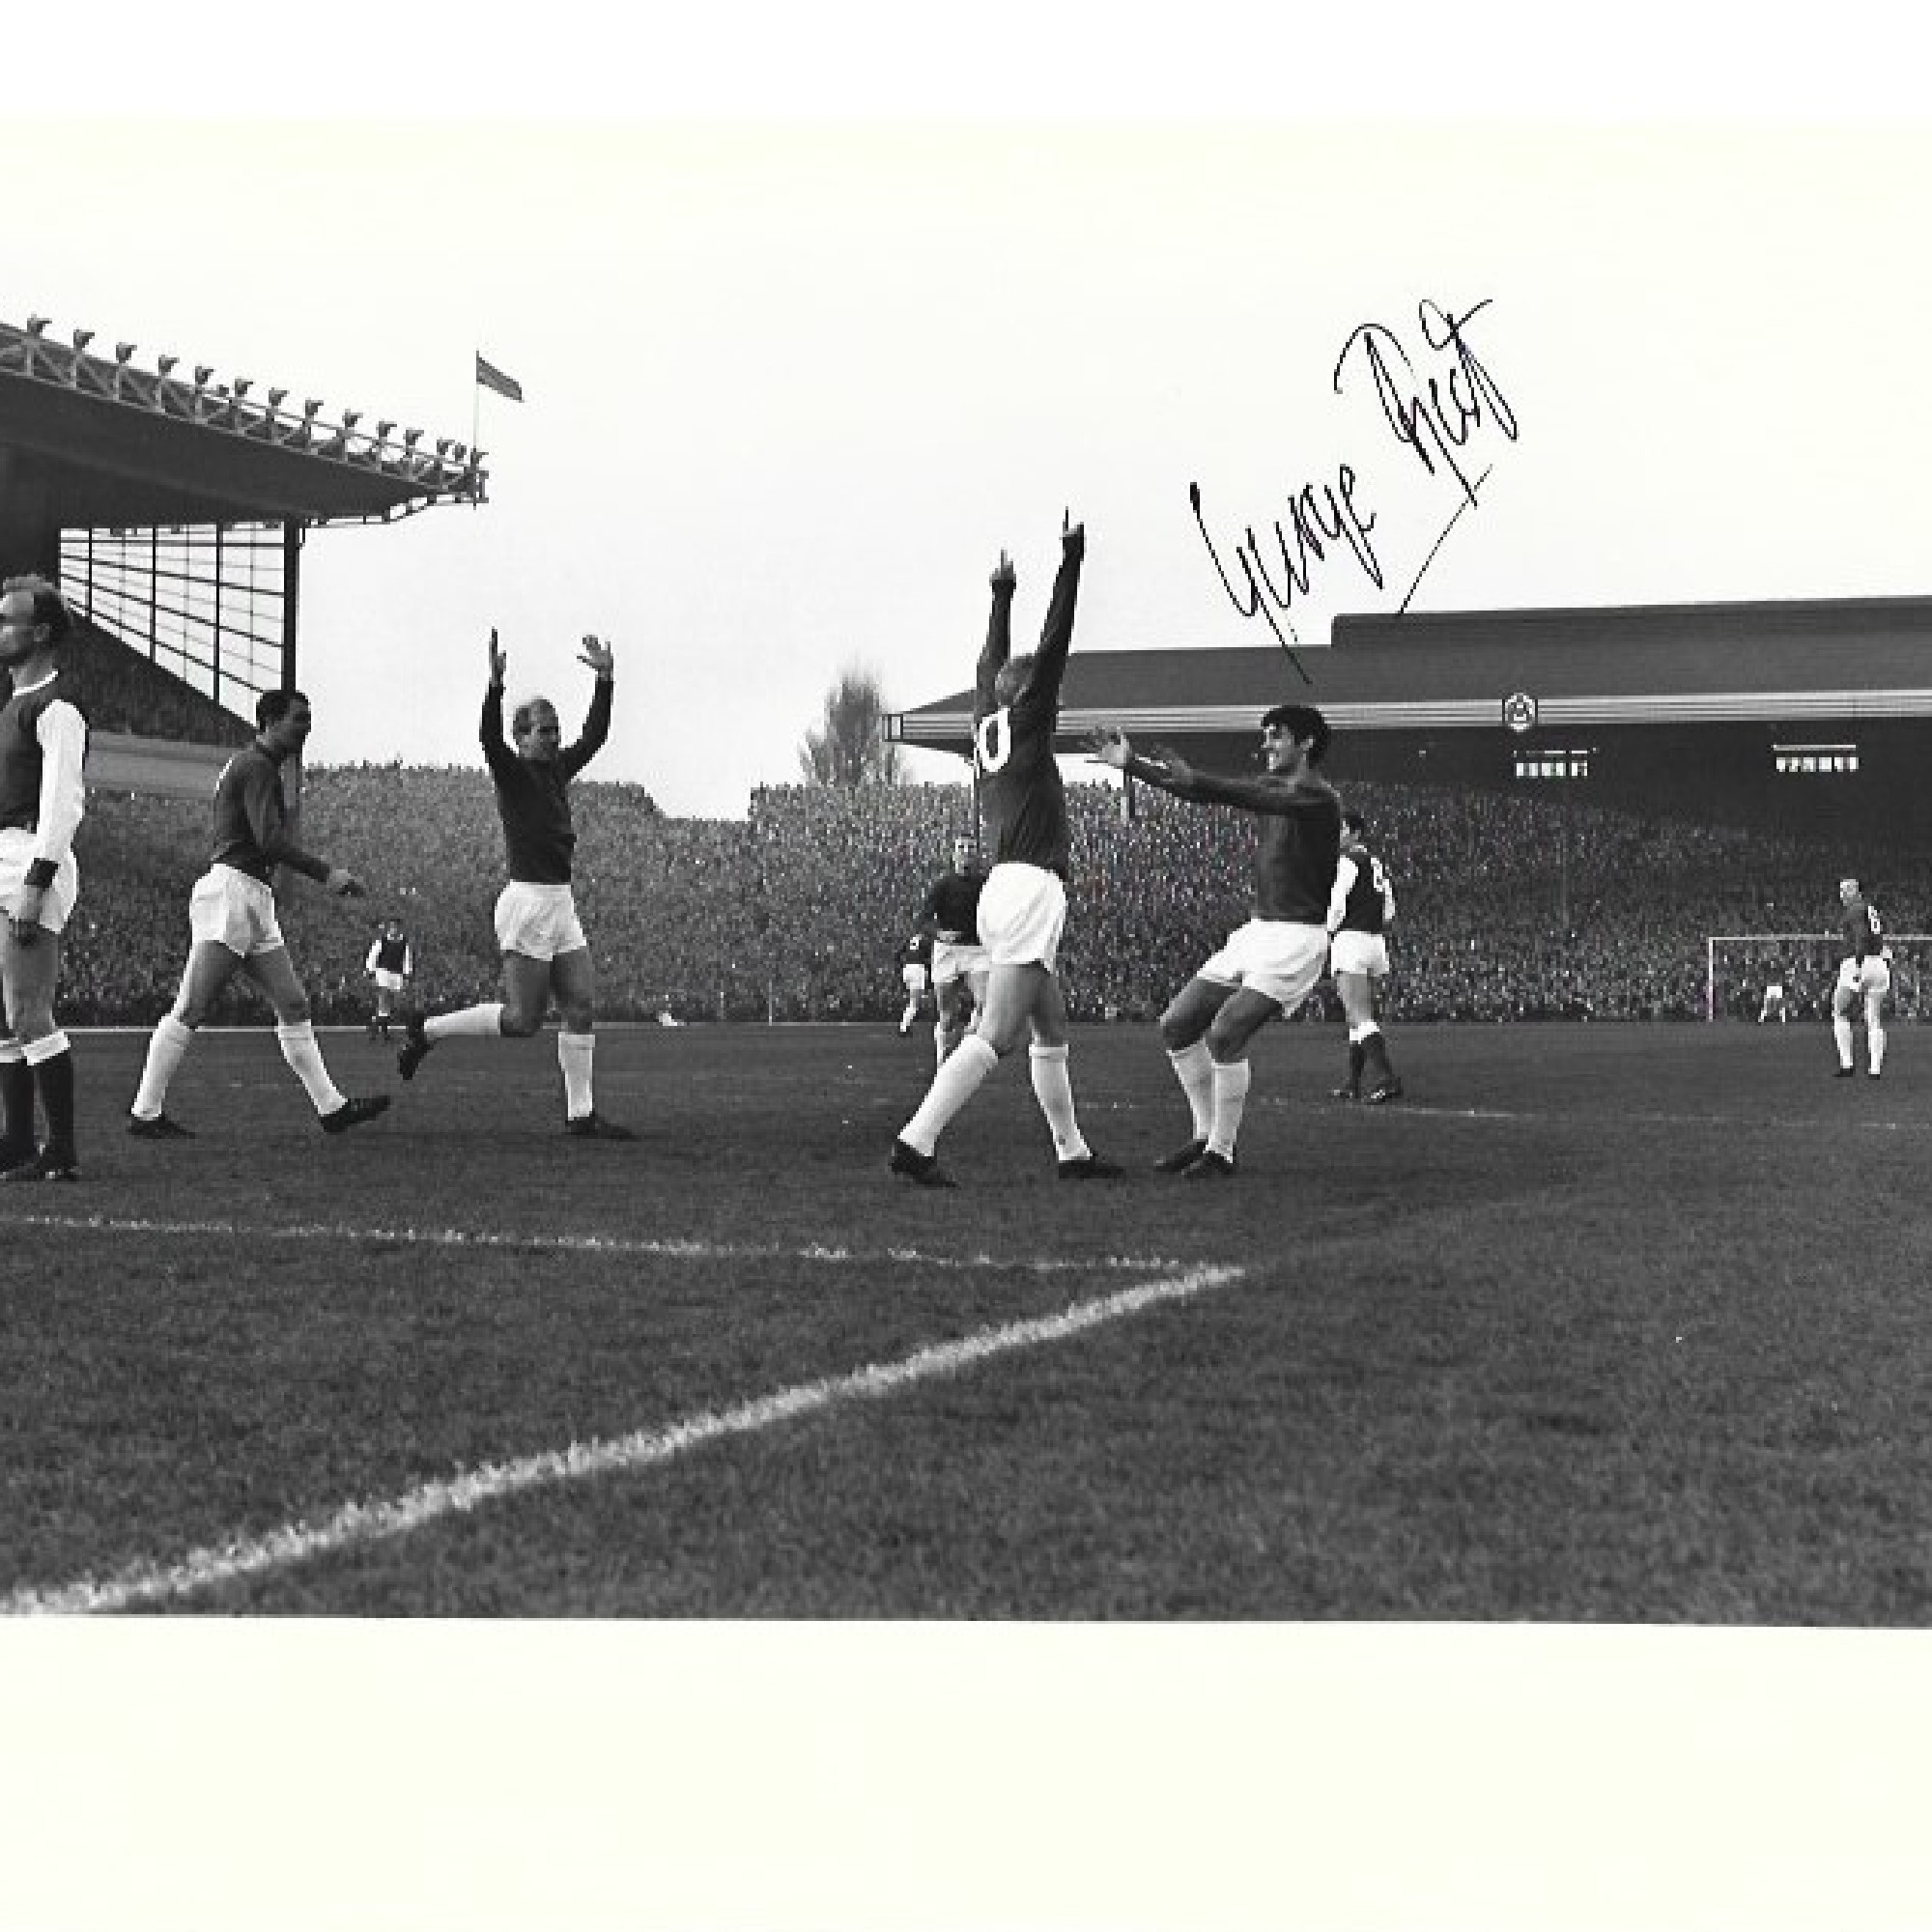 George Best (1946-2005) Signed Manchester United 8x10 Photo . Good condition. All autographs come